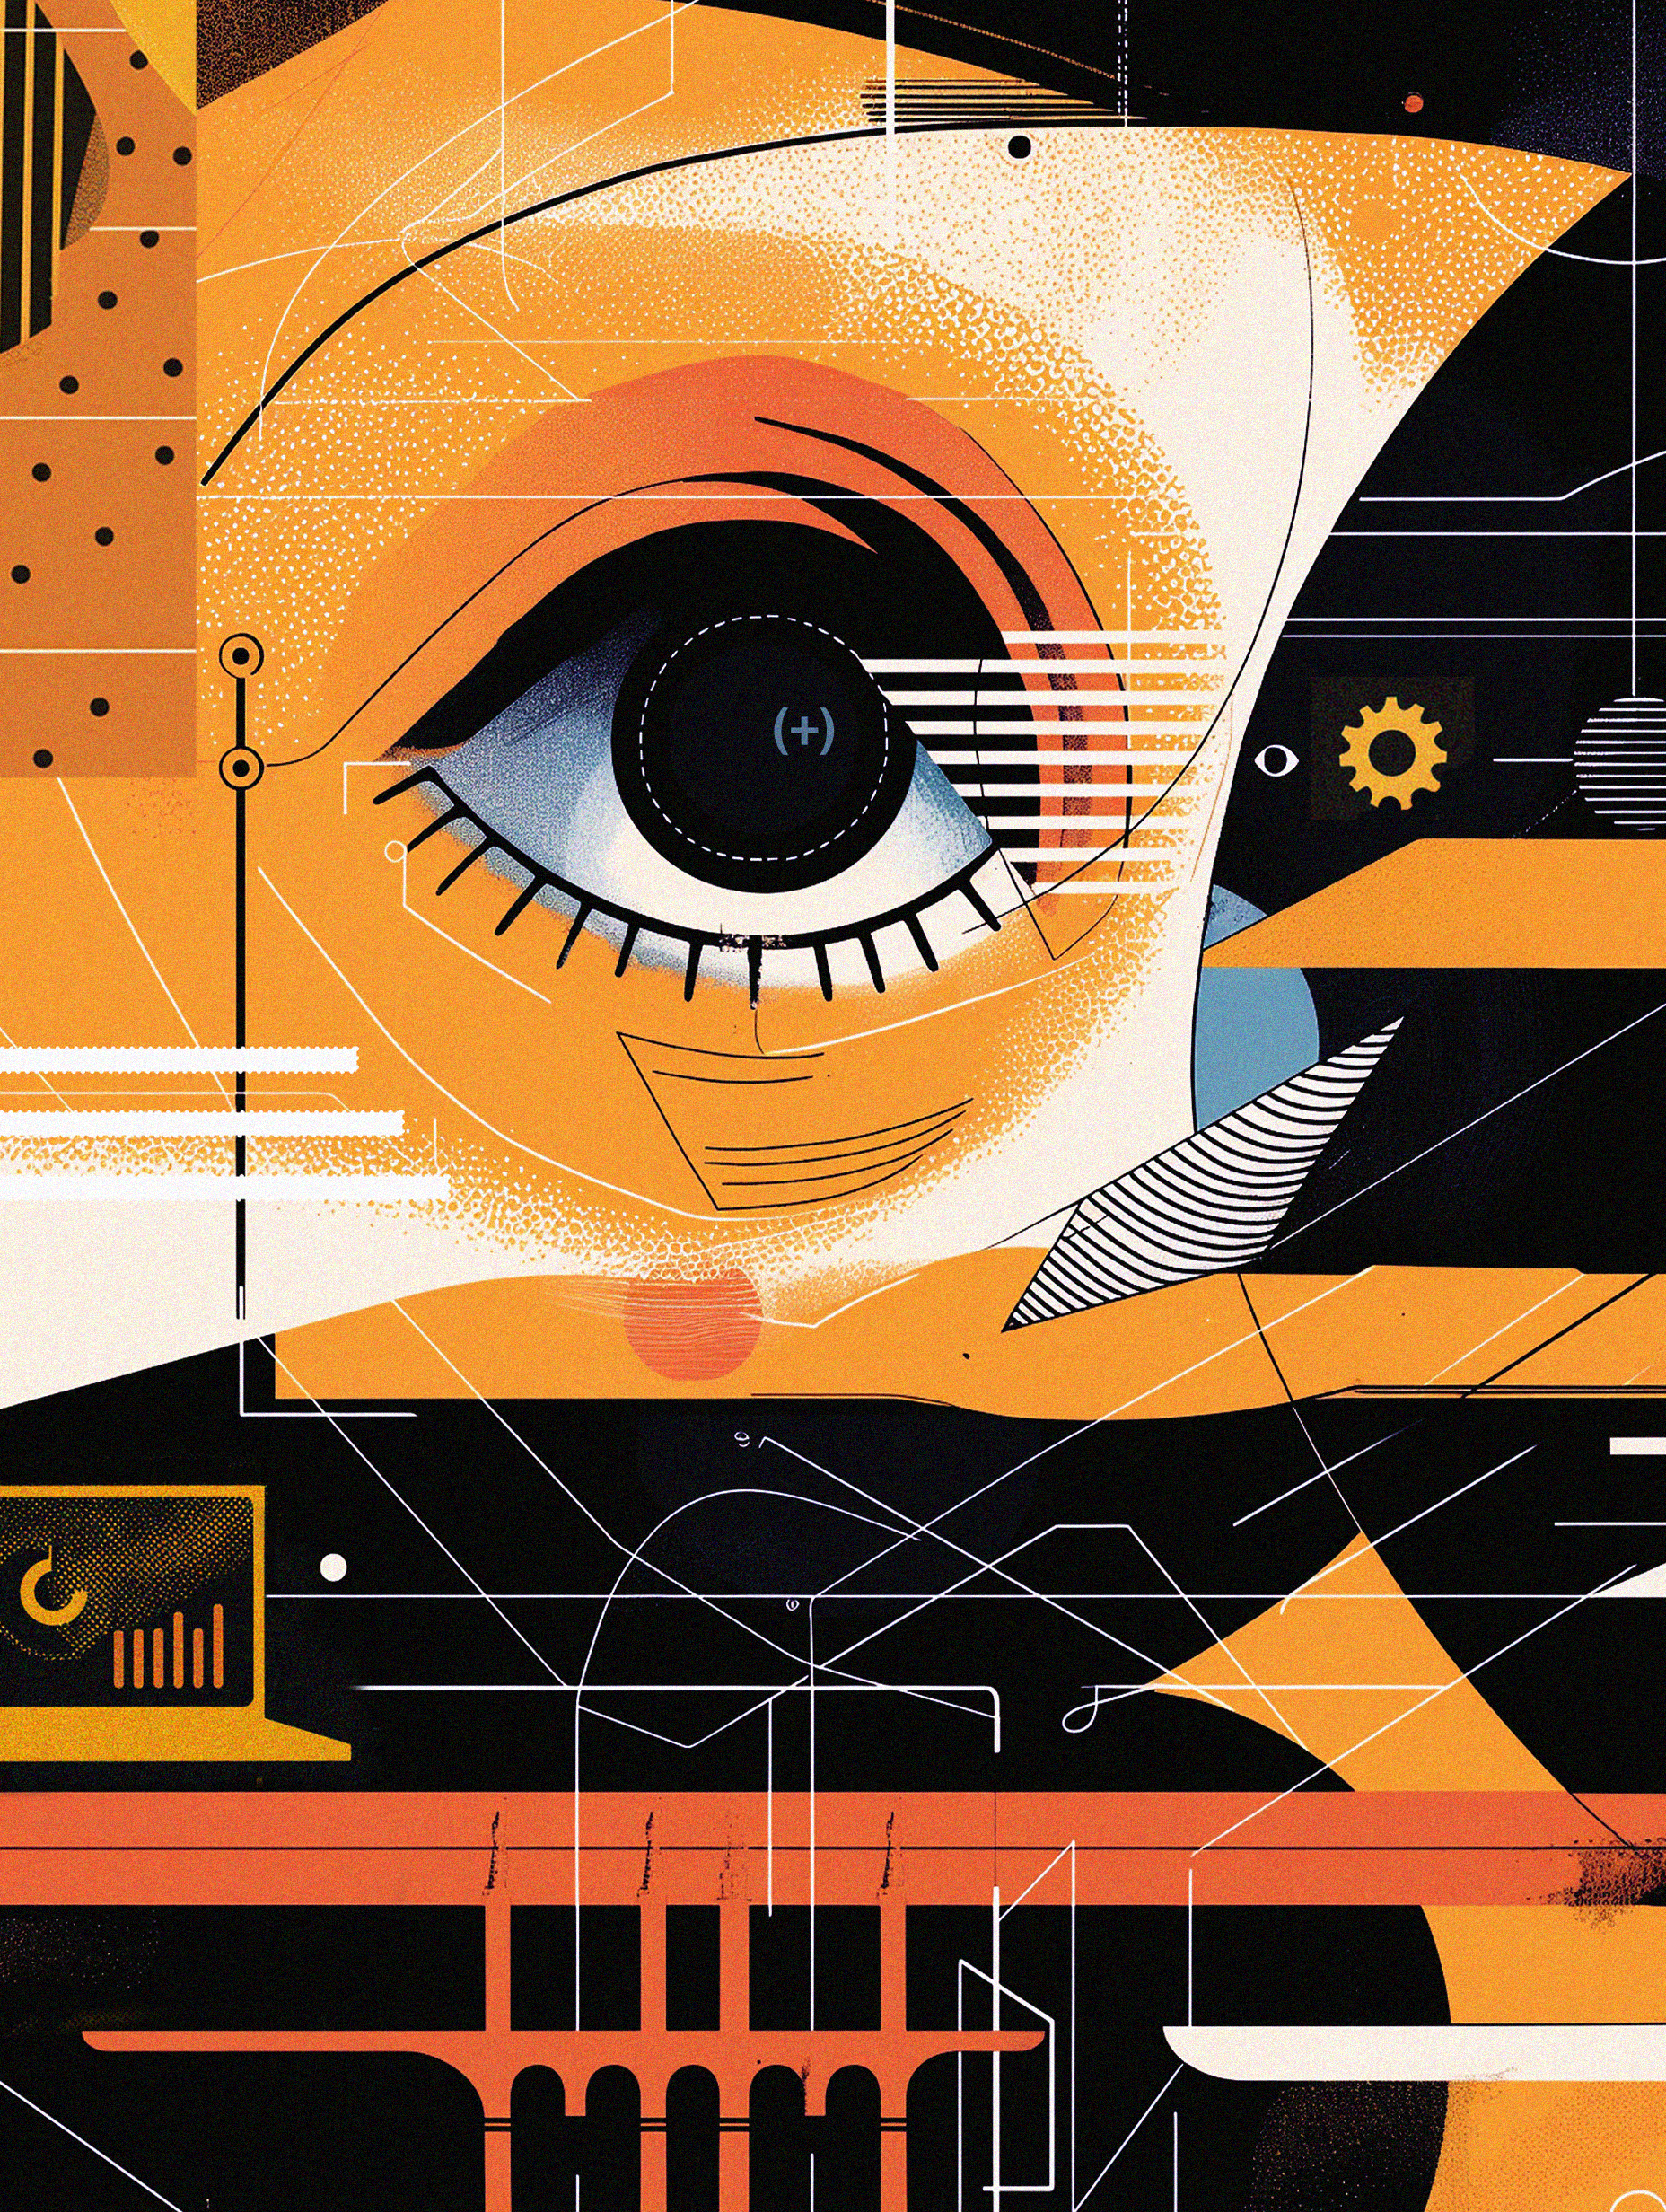 A stylized, abstract graphic of an eye surrounded by various geometric shapes, lines, and mechanical elements, predominantly in shades of orange, black, and white.